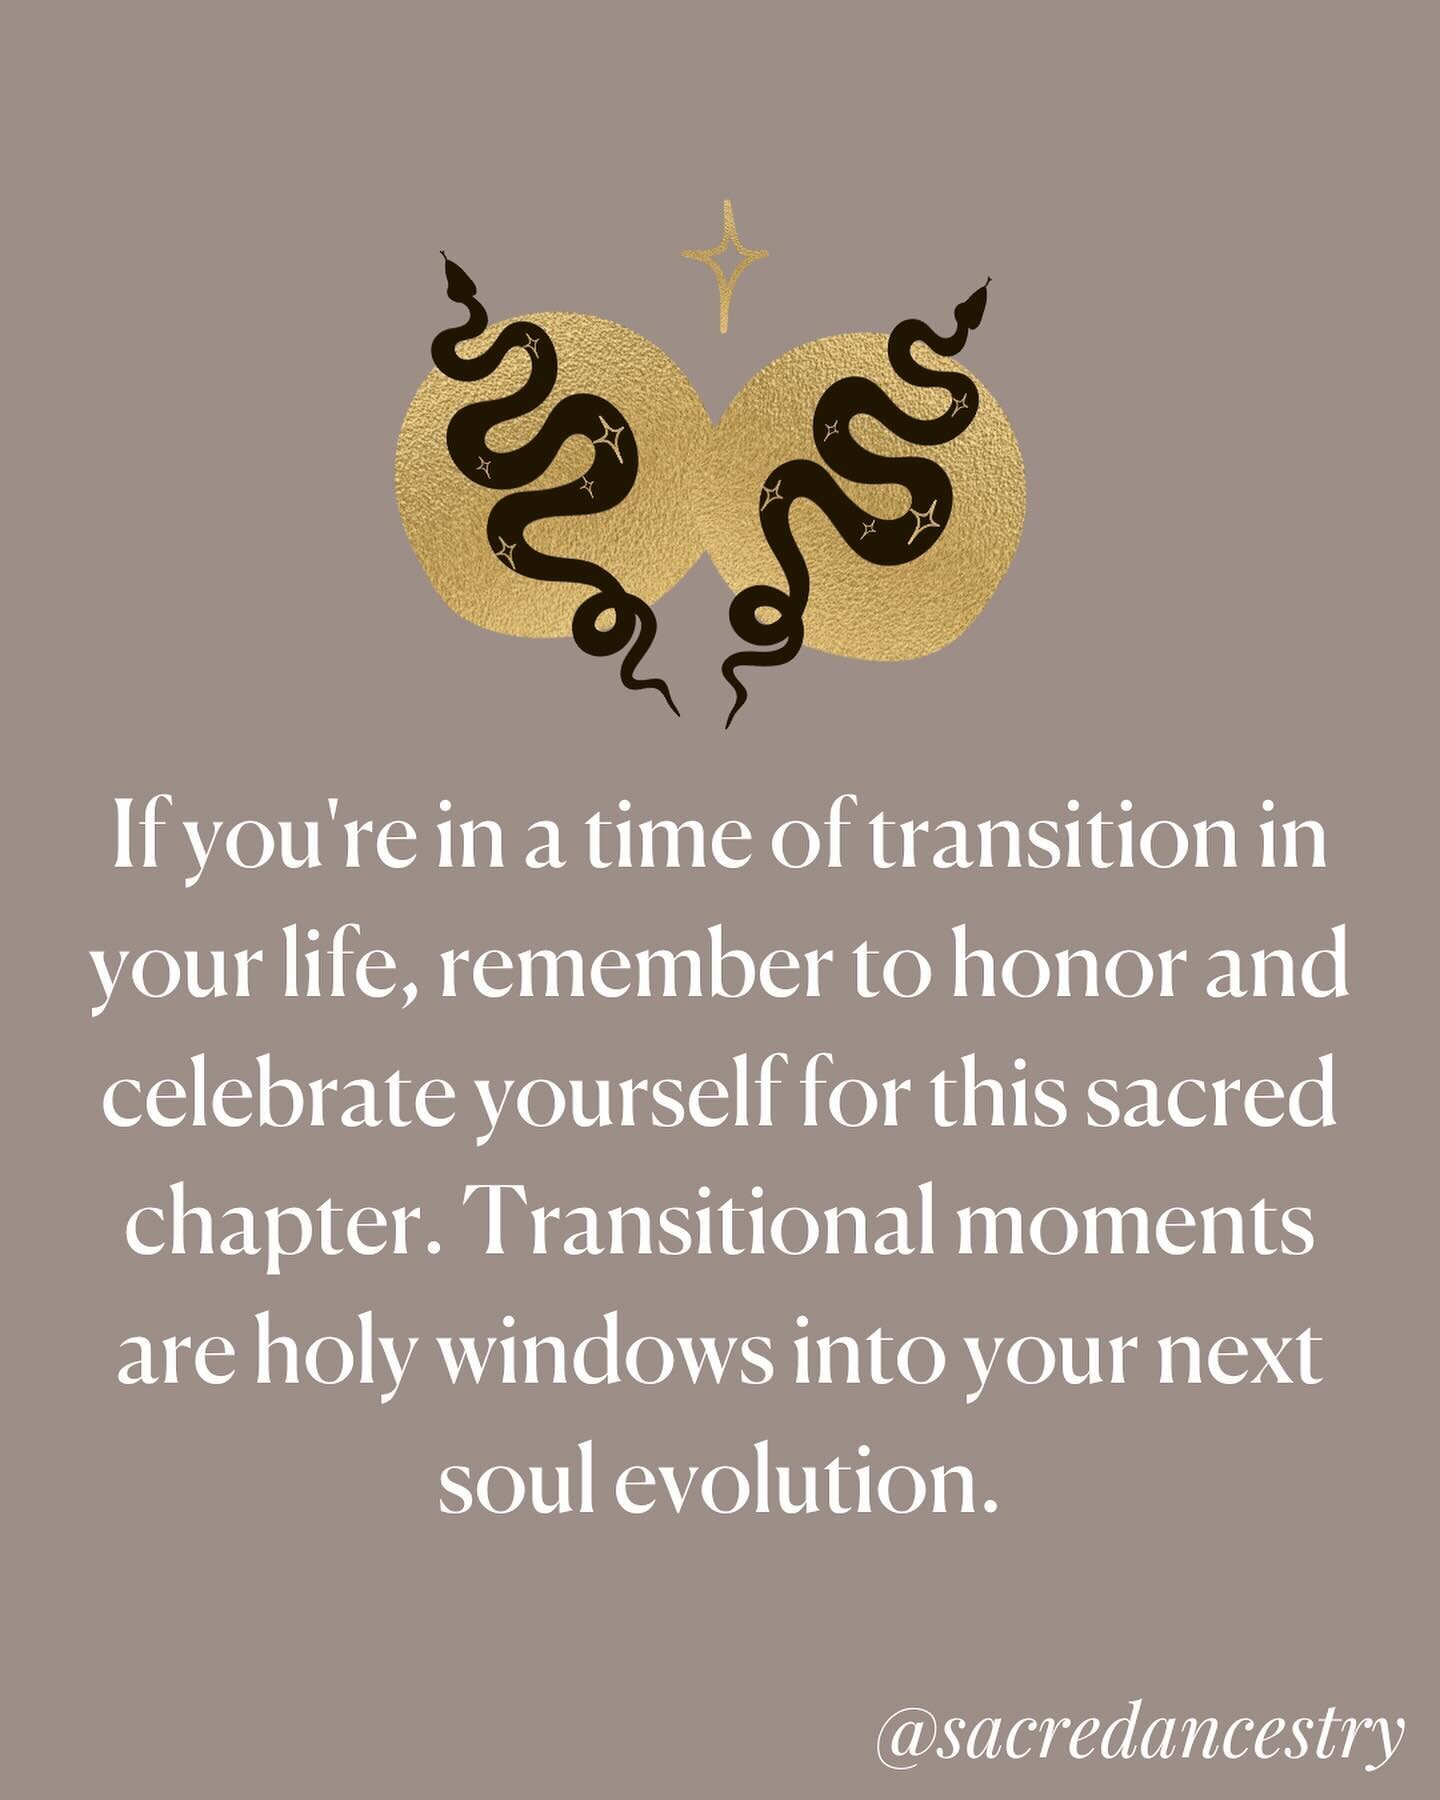 Are you in a time of transition? 👇🏼

The more I look around recently, the more I see that SO many of us going through big life changes.

❤️&zwj;🔥 So many long-term and soul-level relationships are shifting.

🐍 Some of us are going through massive